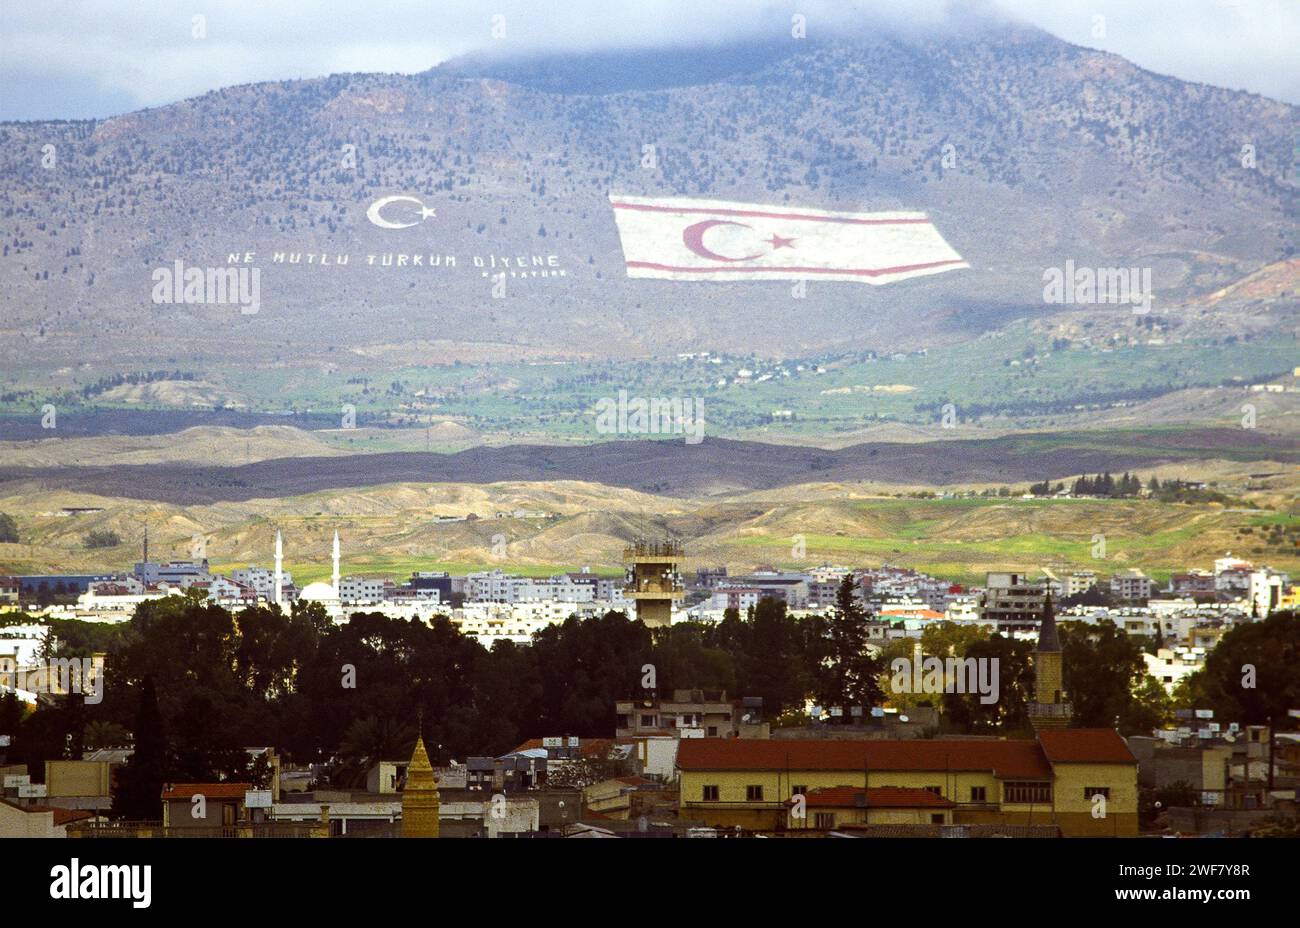 “I am proud to be a Turk” is written in huge letters on the mountain in the Turkish Cypriot part of Cyprus. Stock Photo